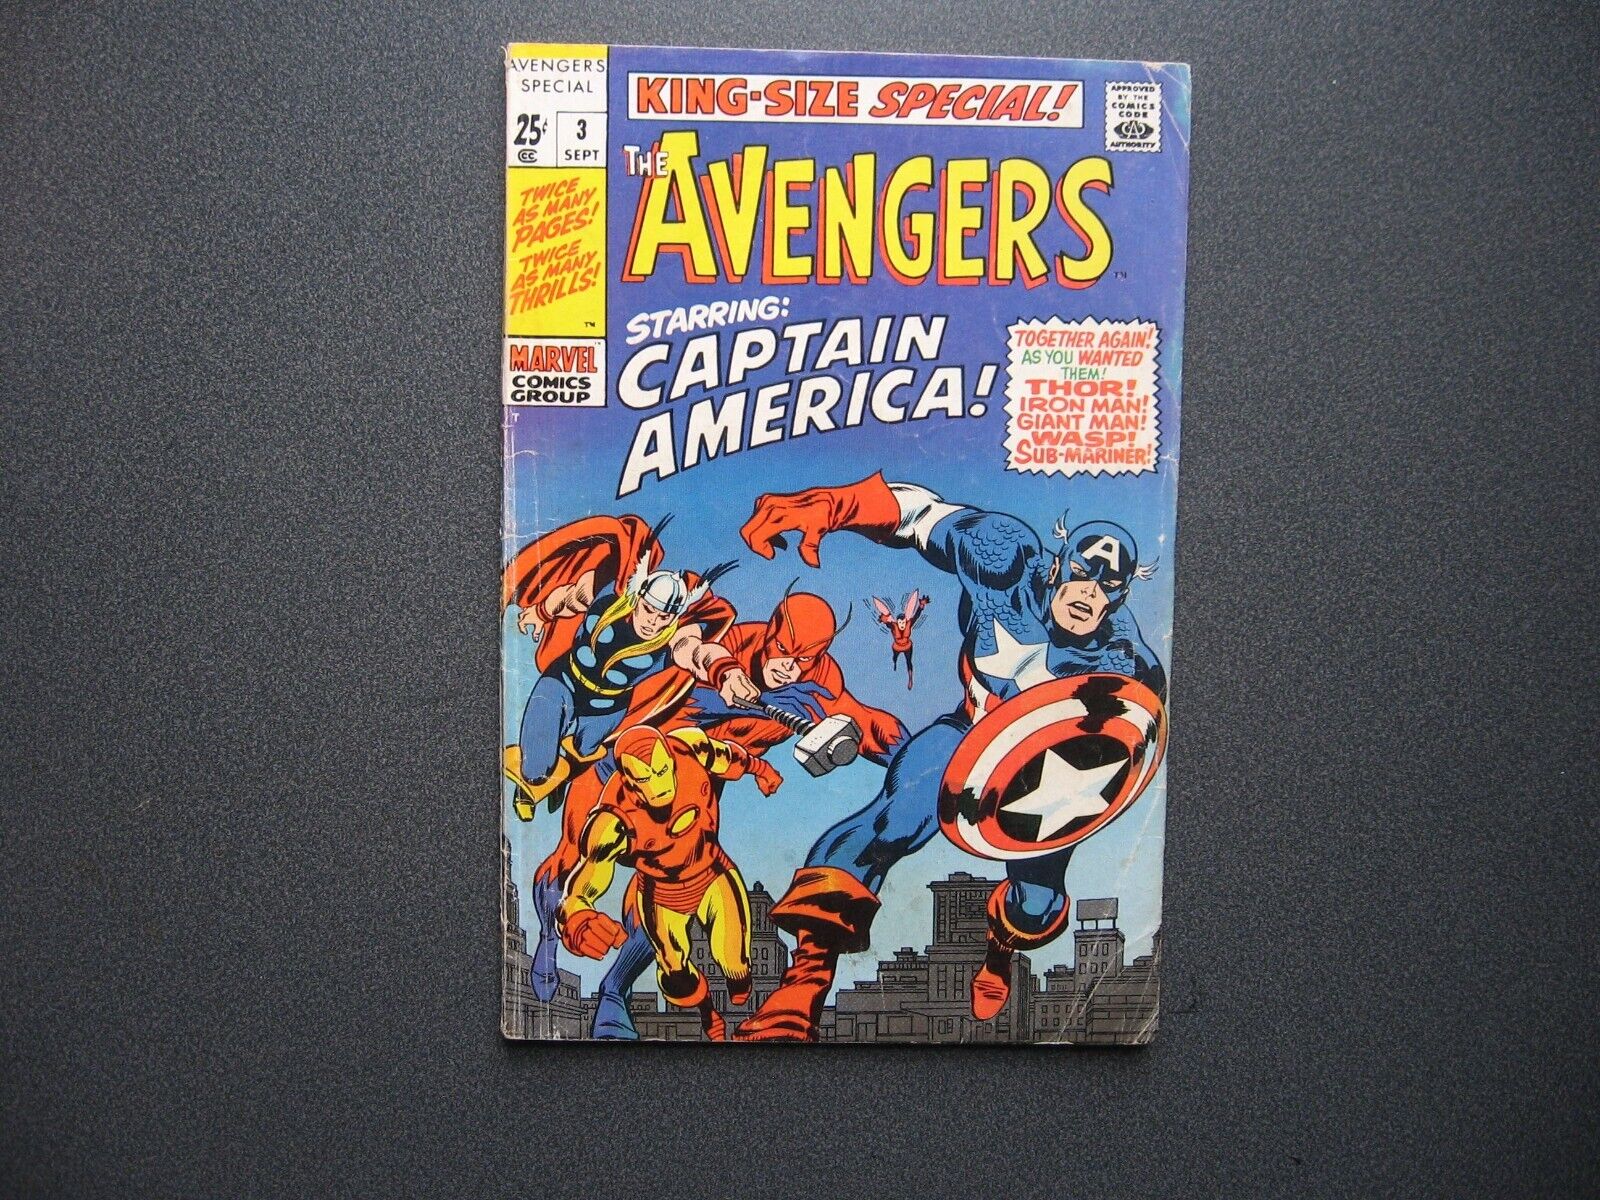 AVENGERS KING-SIZE SPECIAL #3 Marvel Comic Book 1969 Captain America Low-Grade